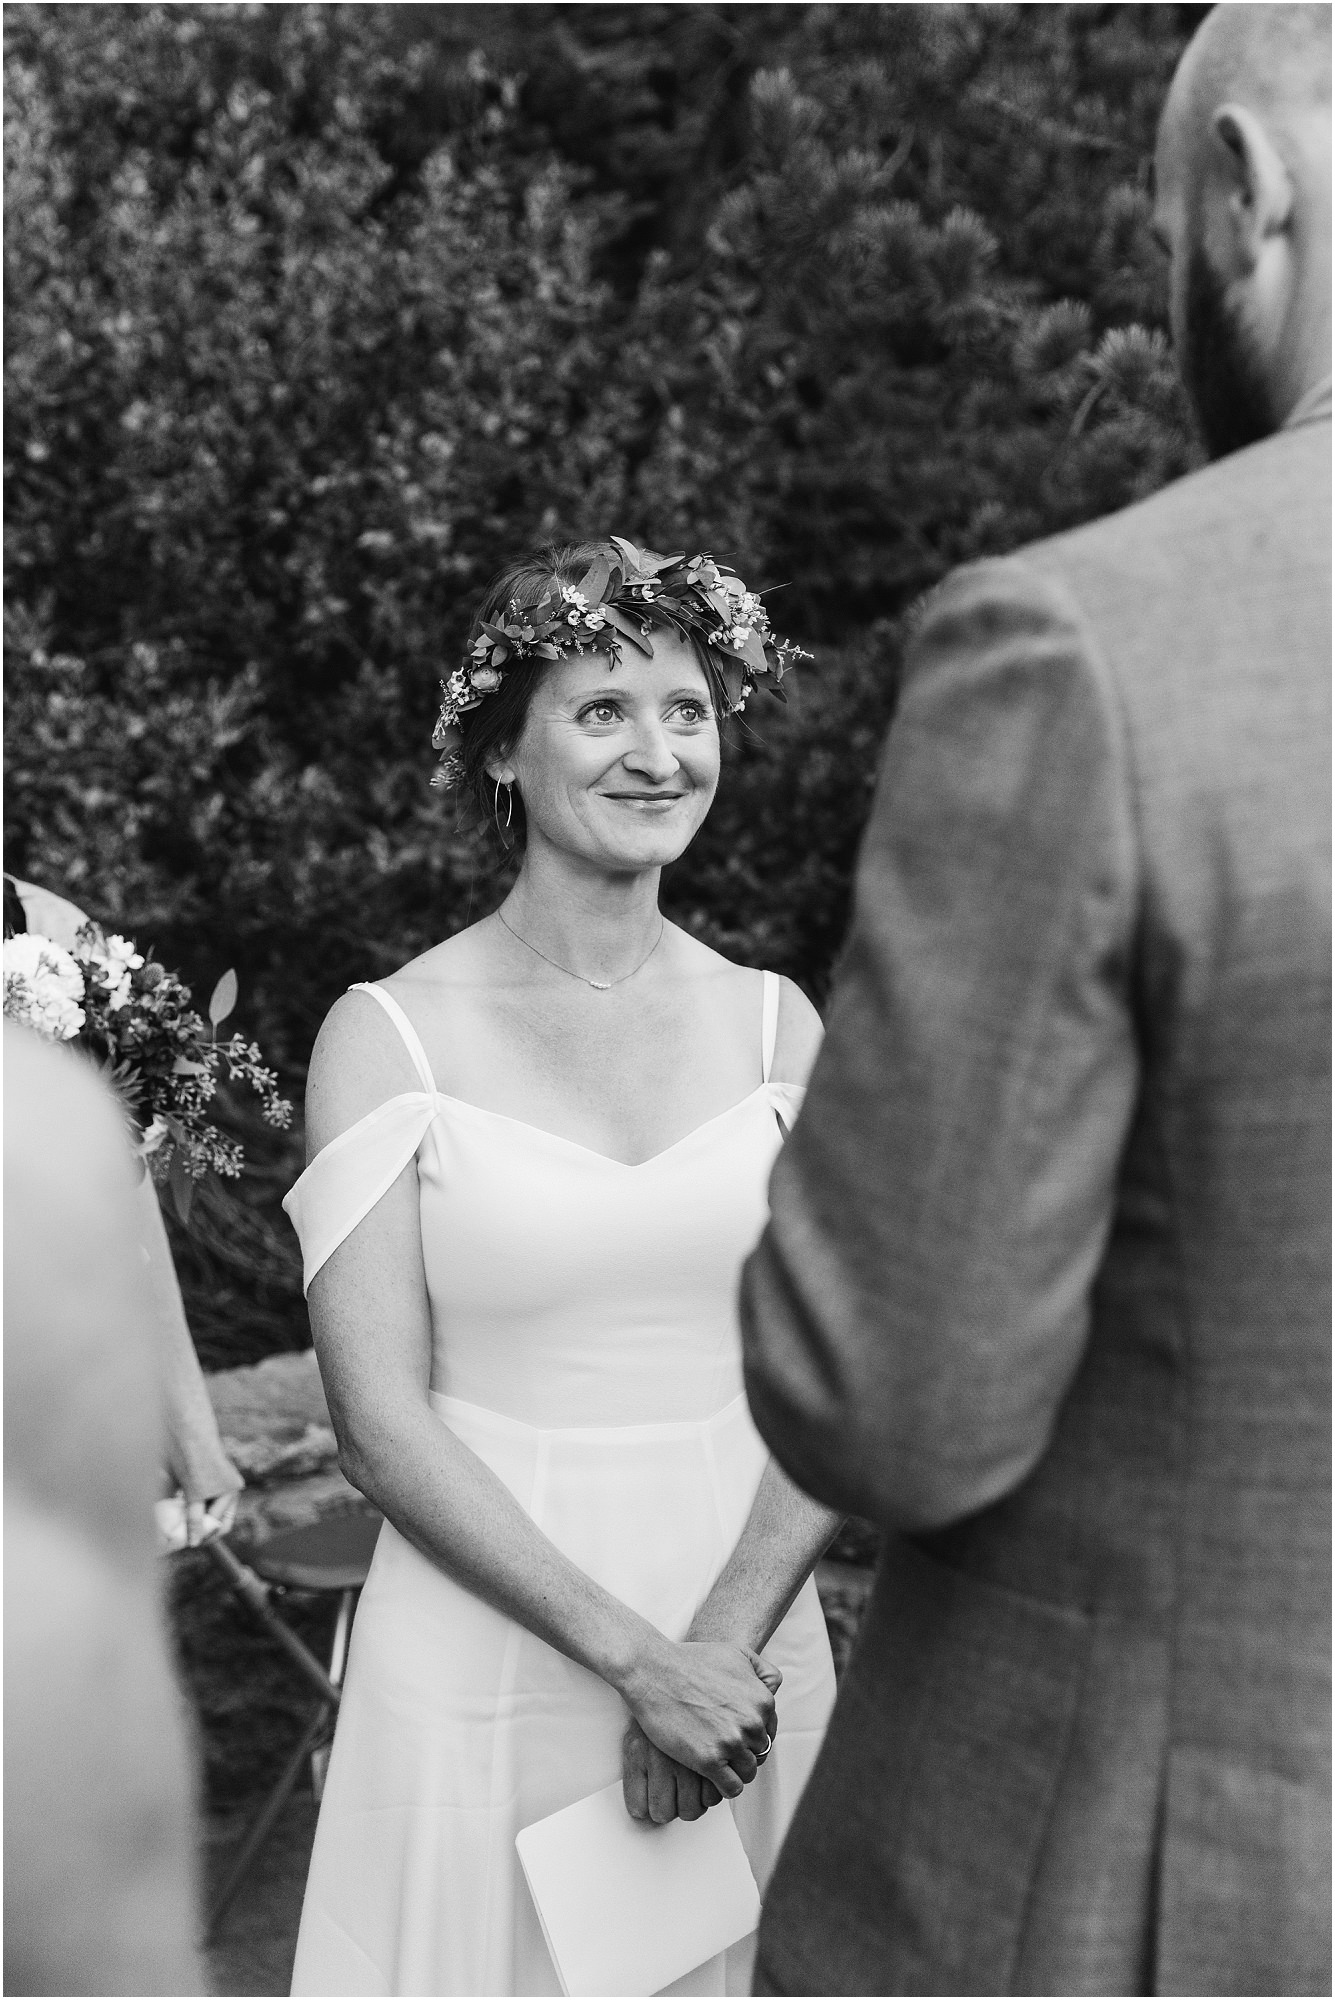 A gorgeous black and white photo of a bride wearing a floral crown smiling up at her groom as he reads his vows during their micro wedding at Tumalo Falls in Bend, Oregon. | Erica Swantek Photography